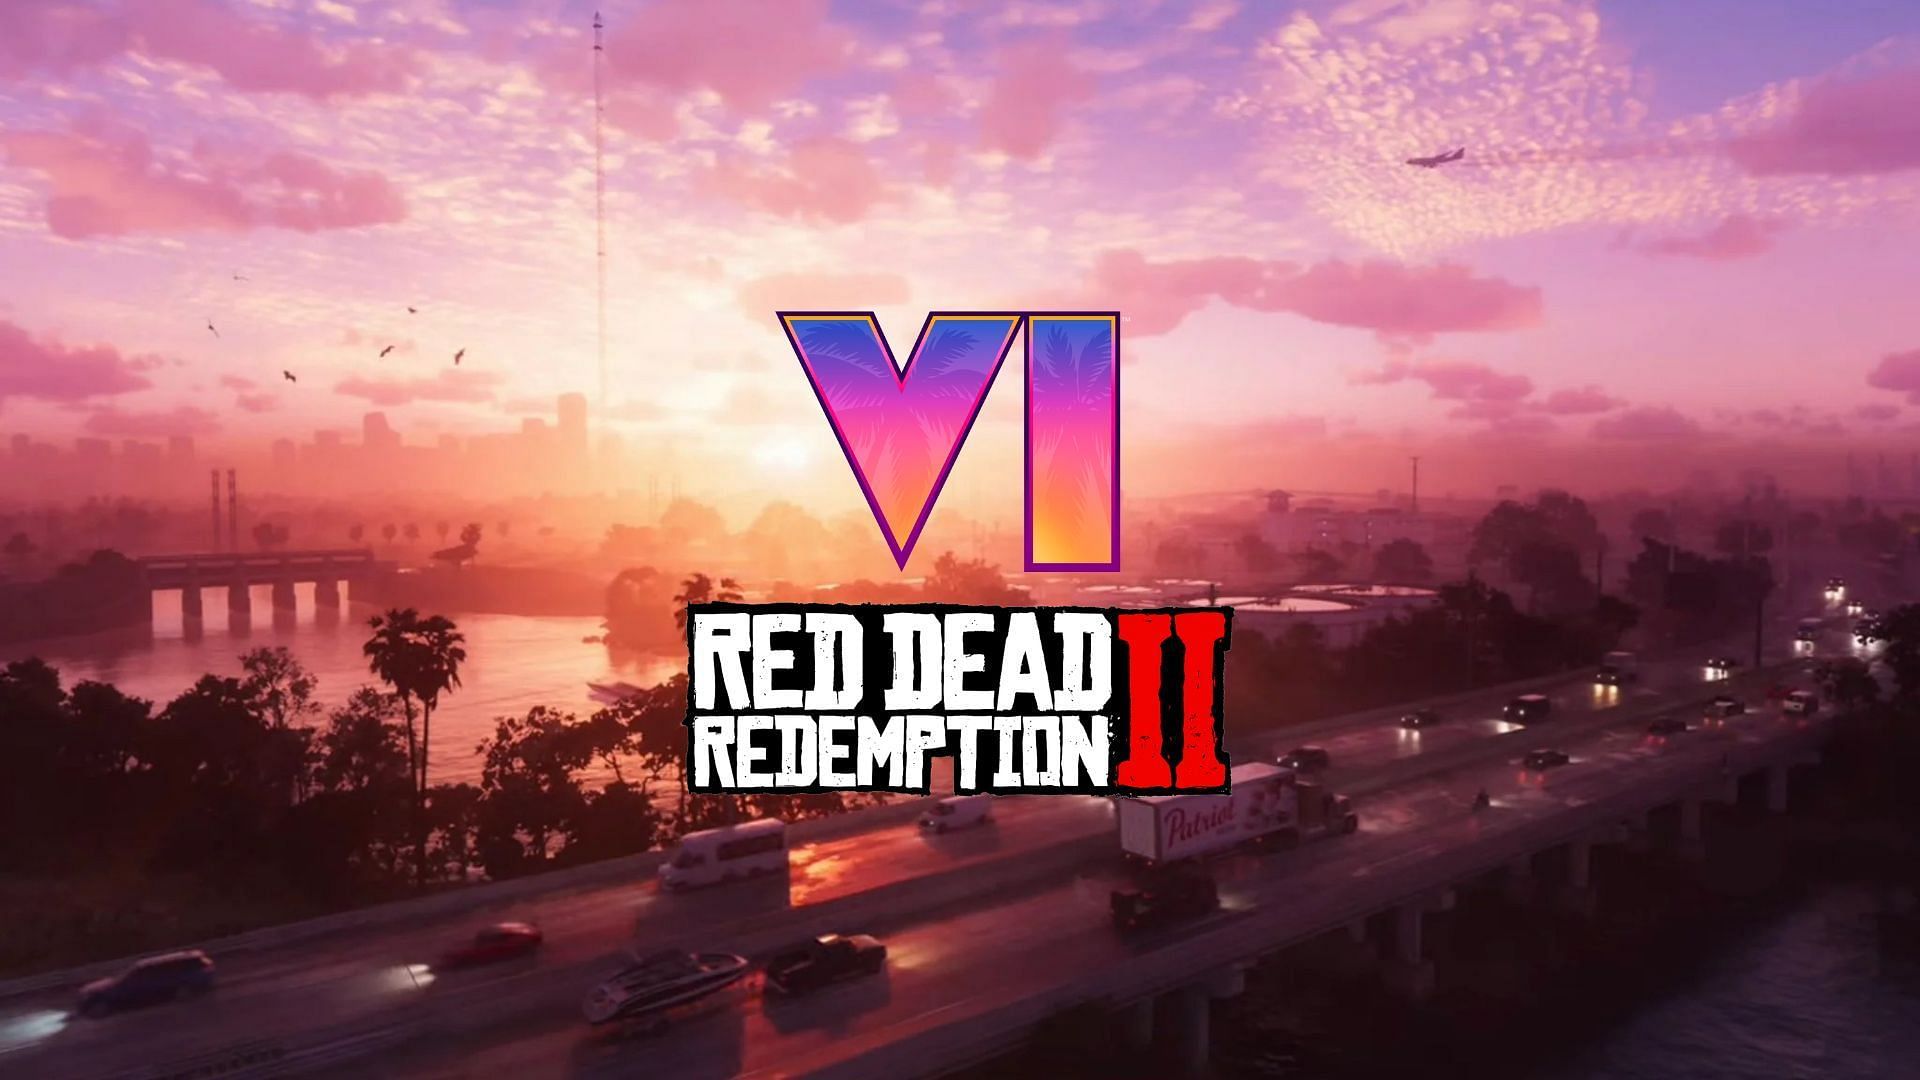 A brief report on a fan-made RDR2 trailer based on the GTA 6 teaser (Image via Rockstar Games)